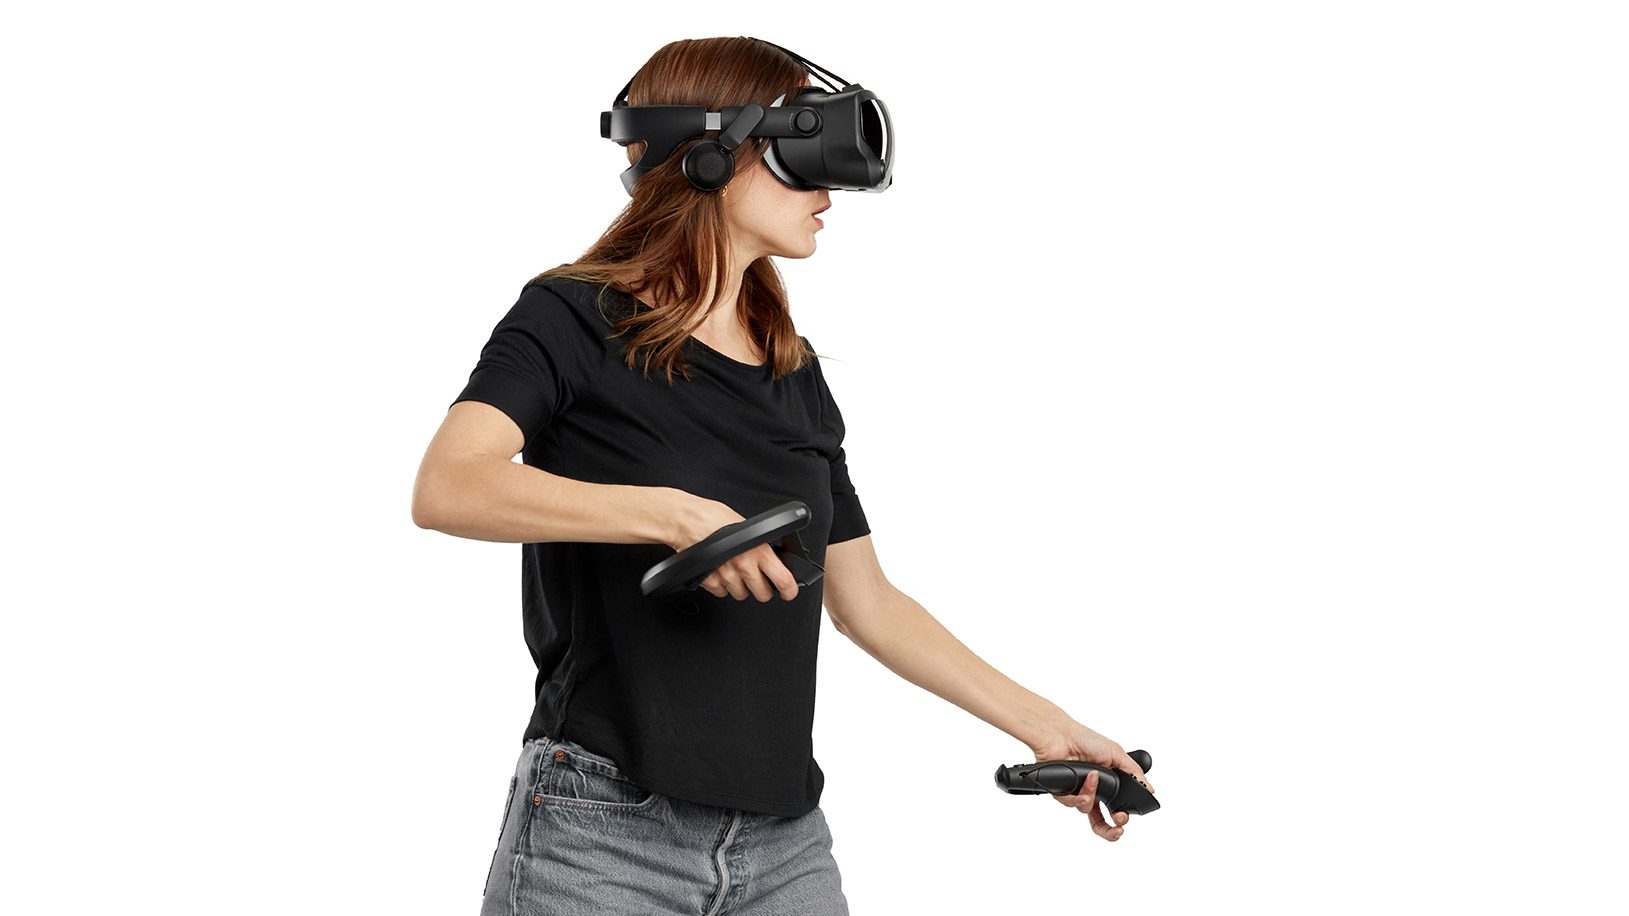 valve index person people (2) - Road to VR.